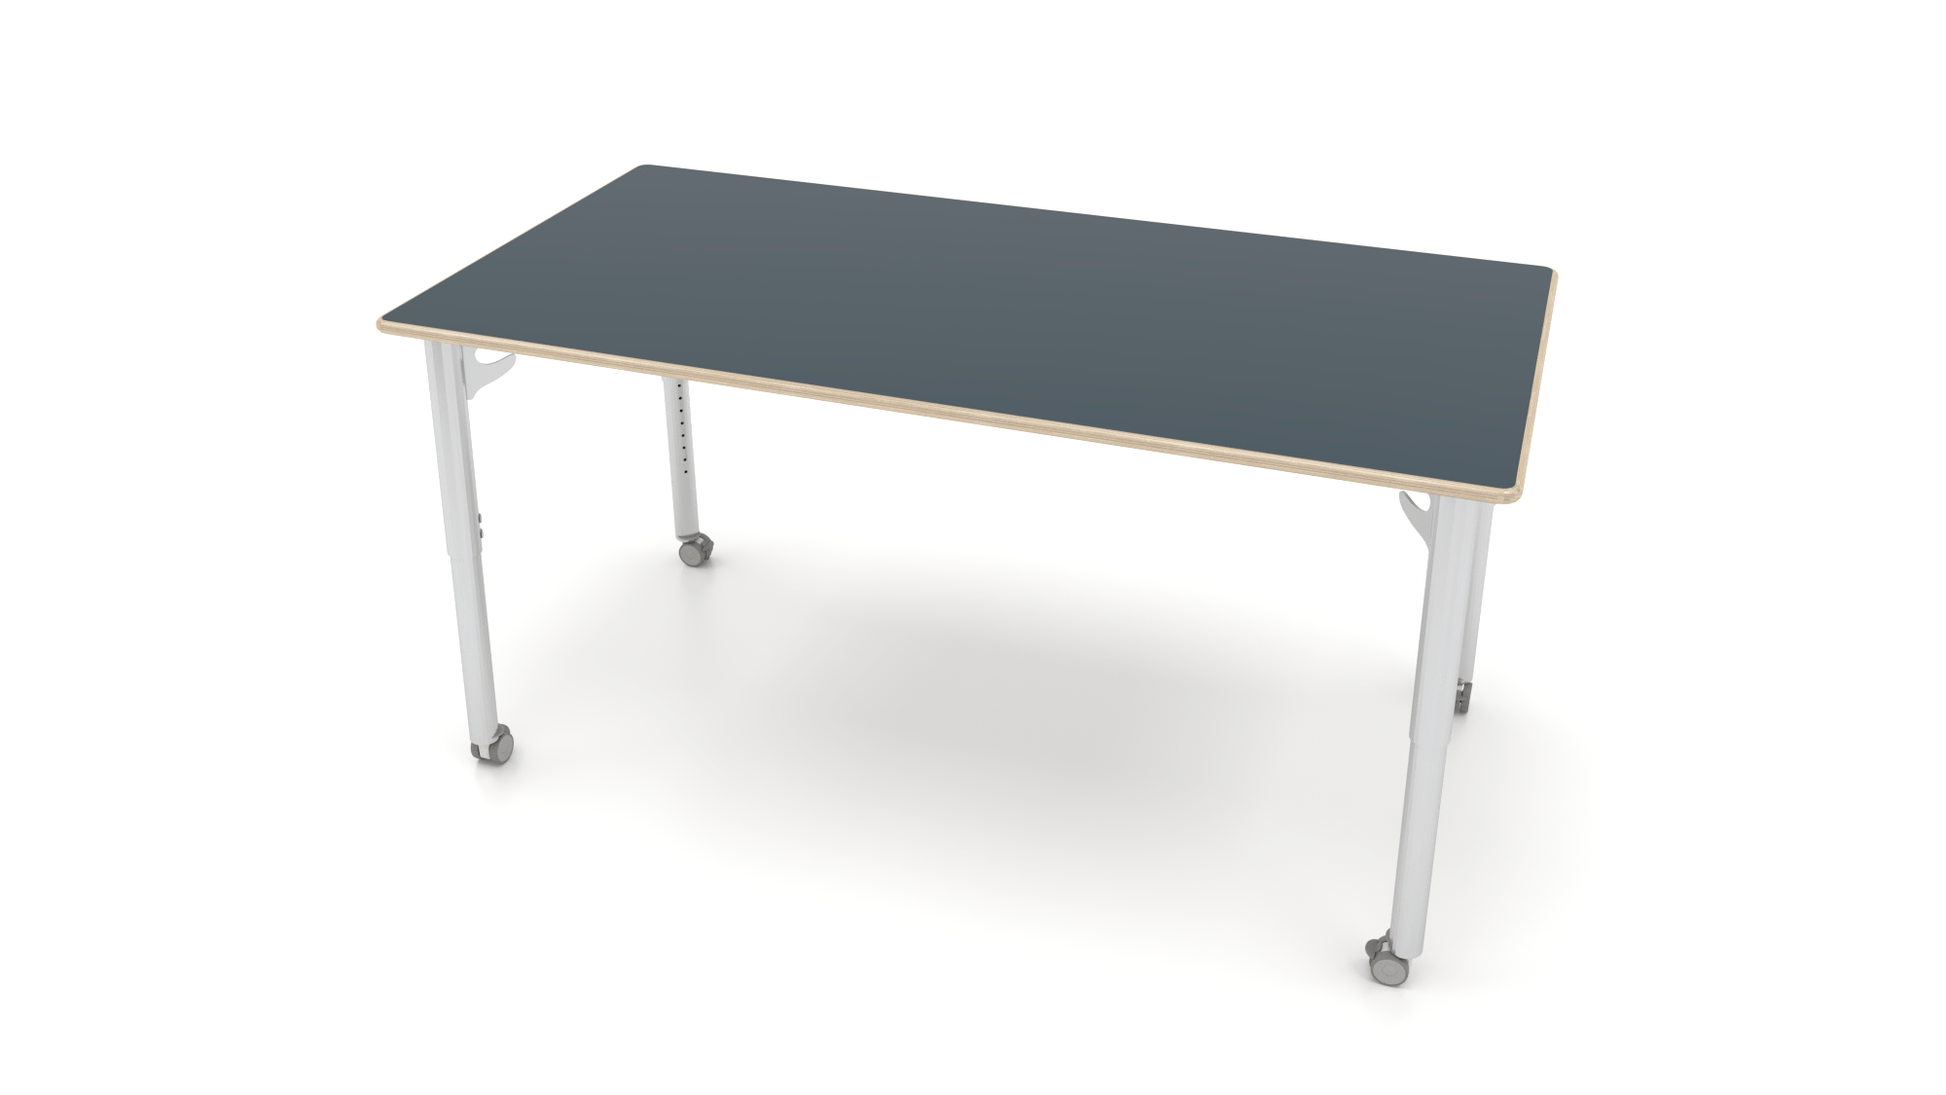 CEF ESTO Table 65.5" x 34" Fenix on Baltic Birch Top and Adjustable Height Legs - SchoolOutlet